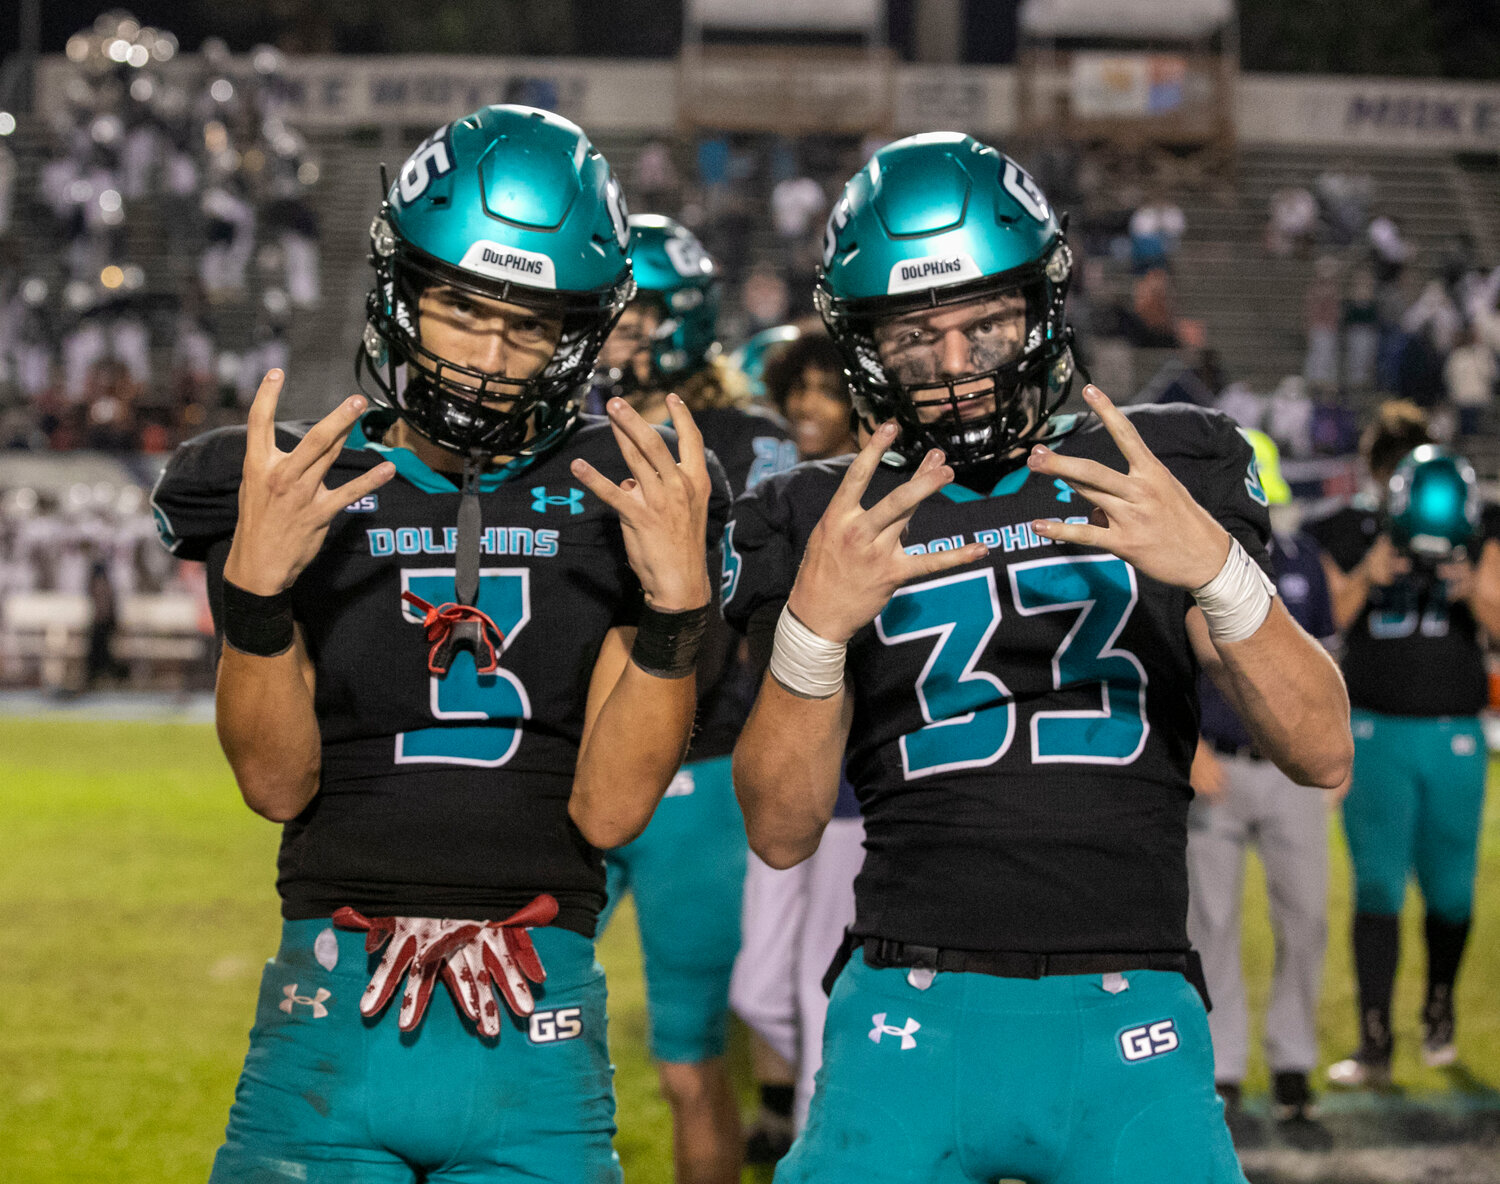 Junior Blaize Thomas (3) and senior Connor Plantz (33) celebrate Gulf Shores’ third-round berth following a 41-0 win over the Charles Henderson Trojans at the Gulf Shores Sportsplex Friday night. The Dolphins advance to their second consecutive state quarterfinal where the Headland Rams will host next week’s third-round tilt.